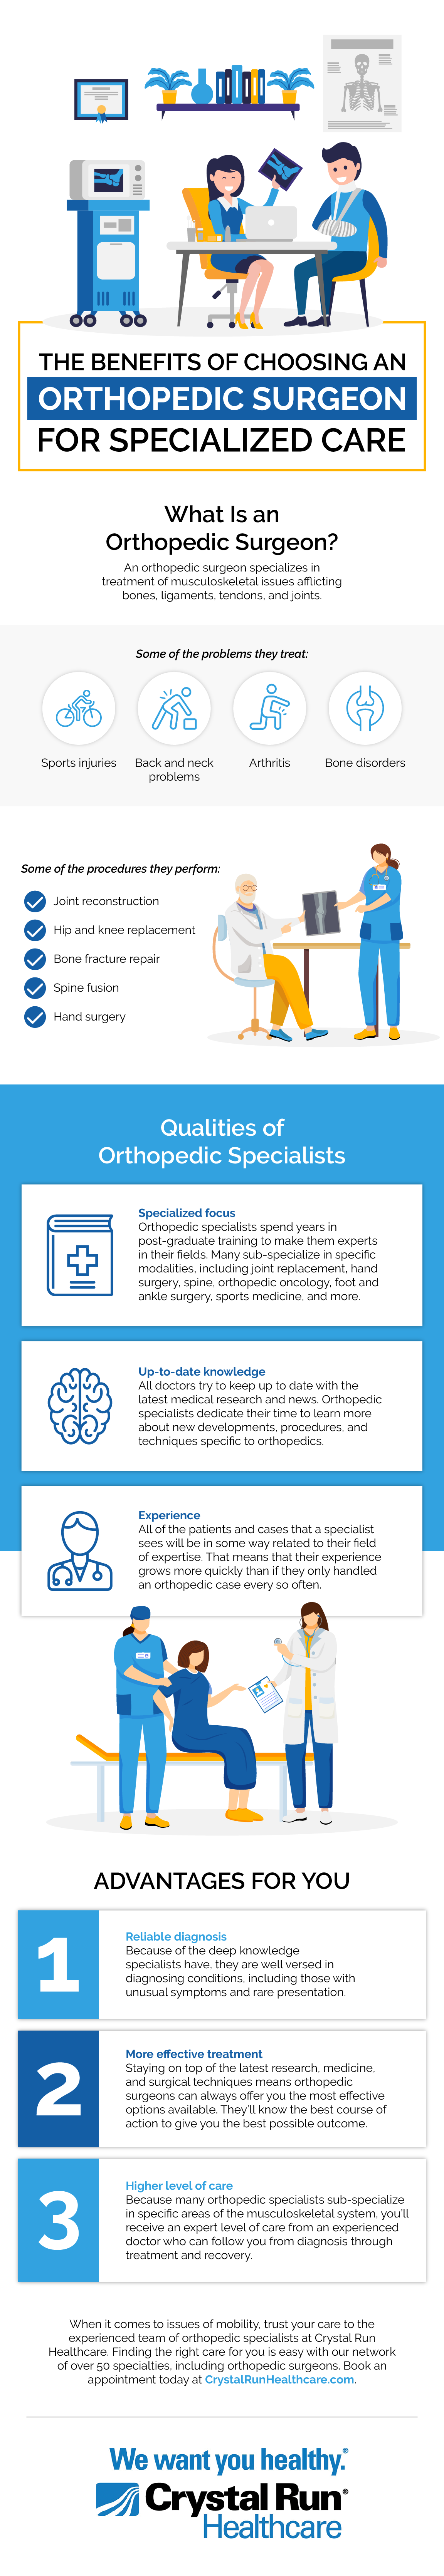 Benefits of Choosing an Orthopedic Surgeon for Specialized Care Infographic